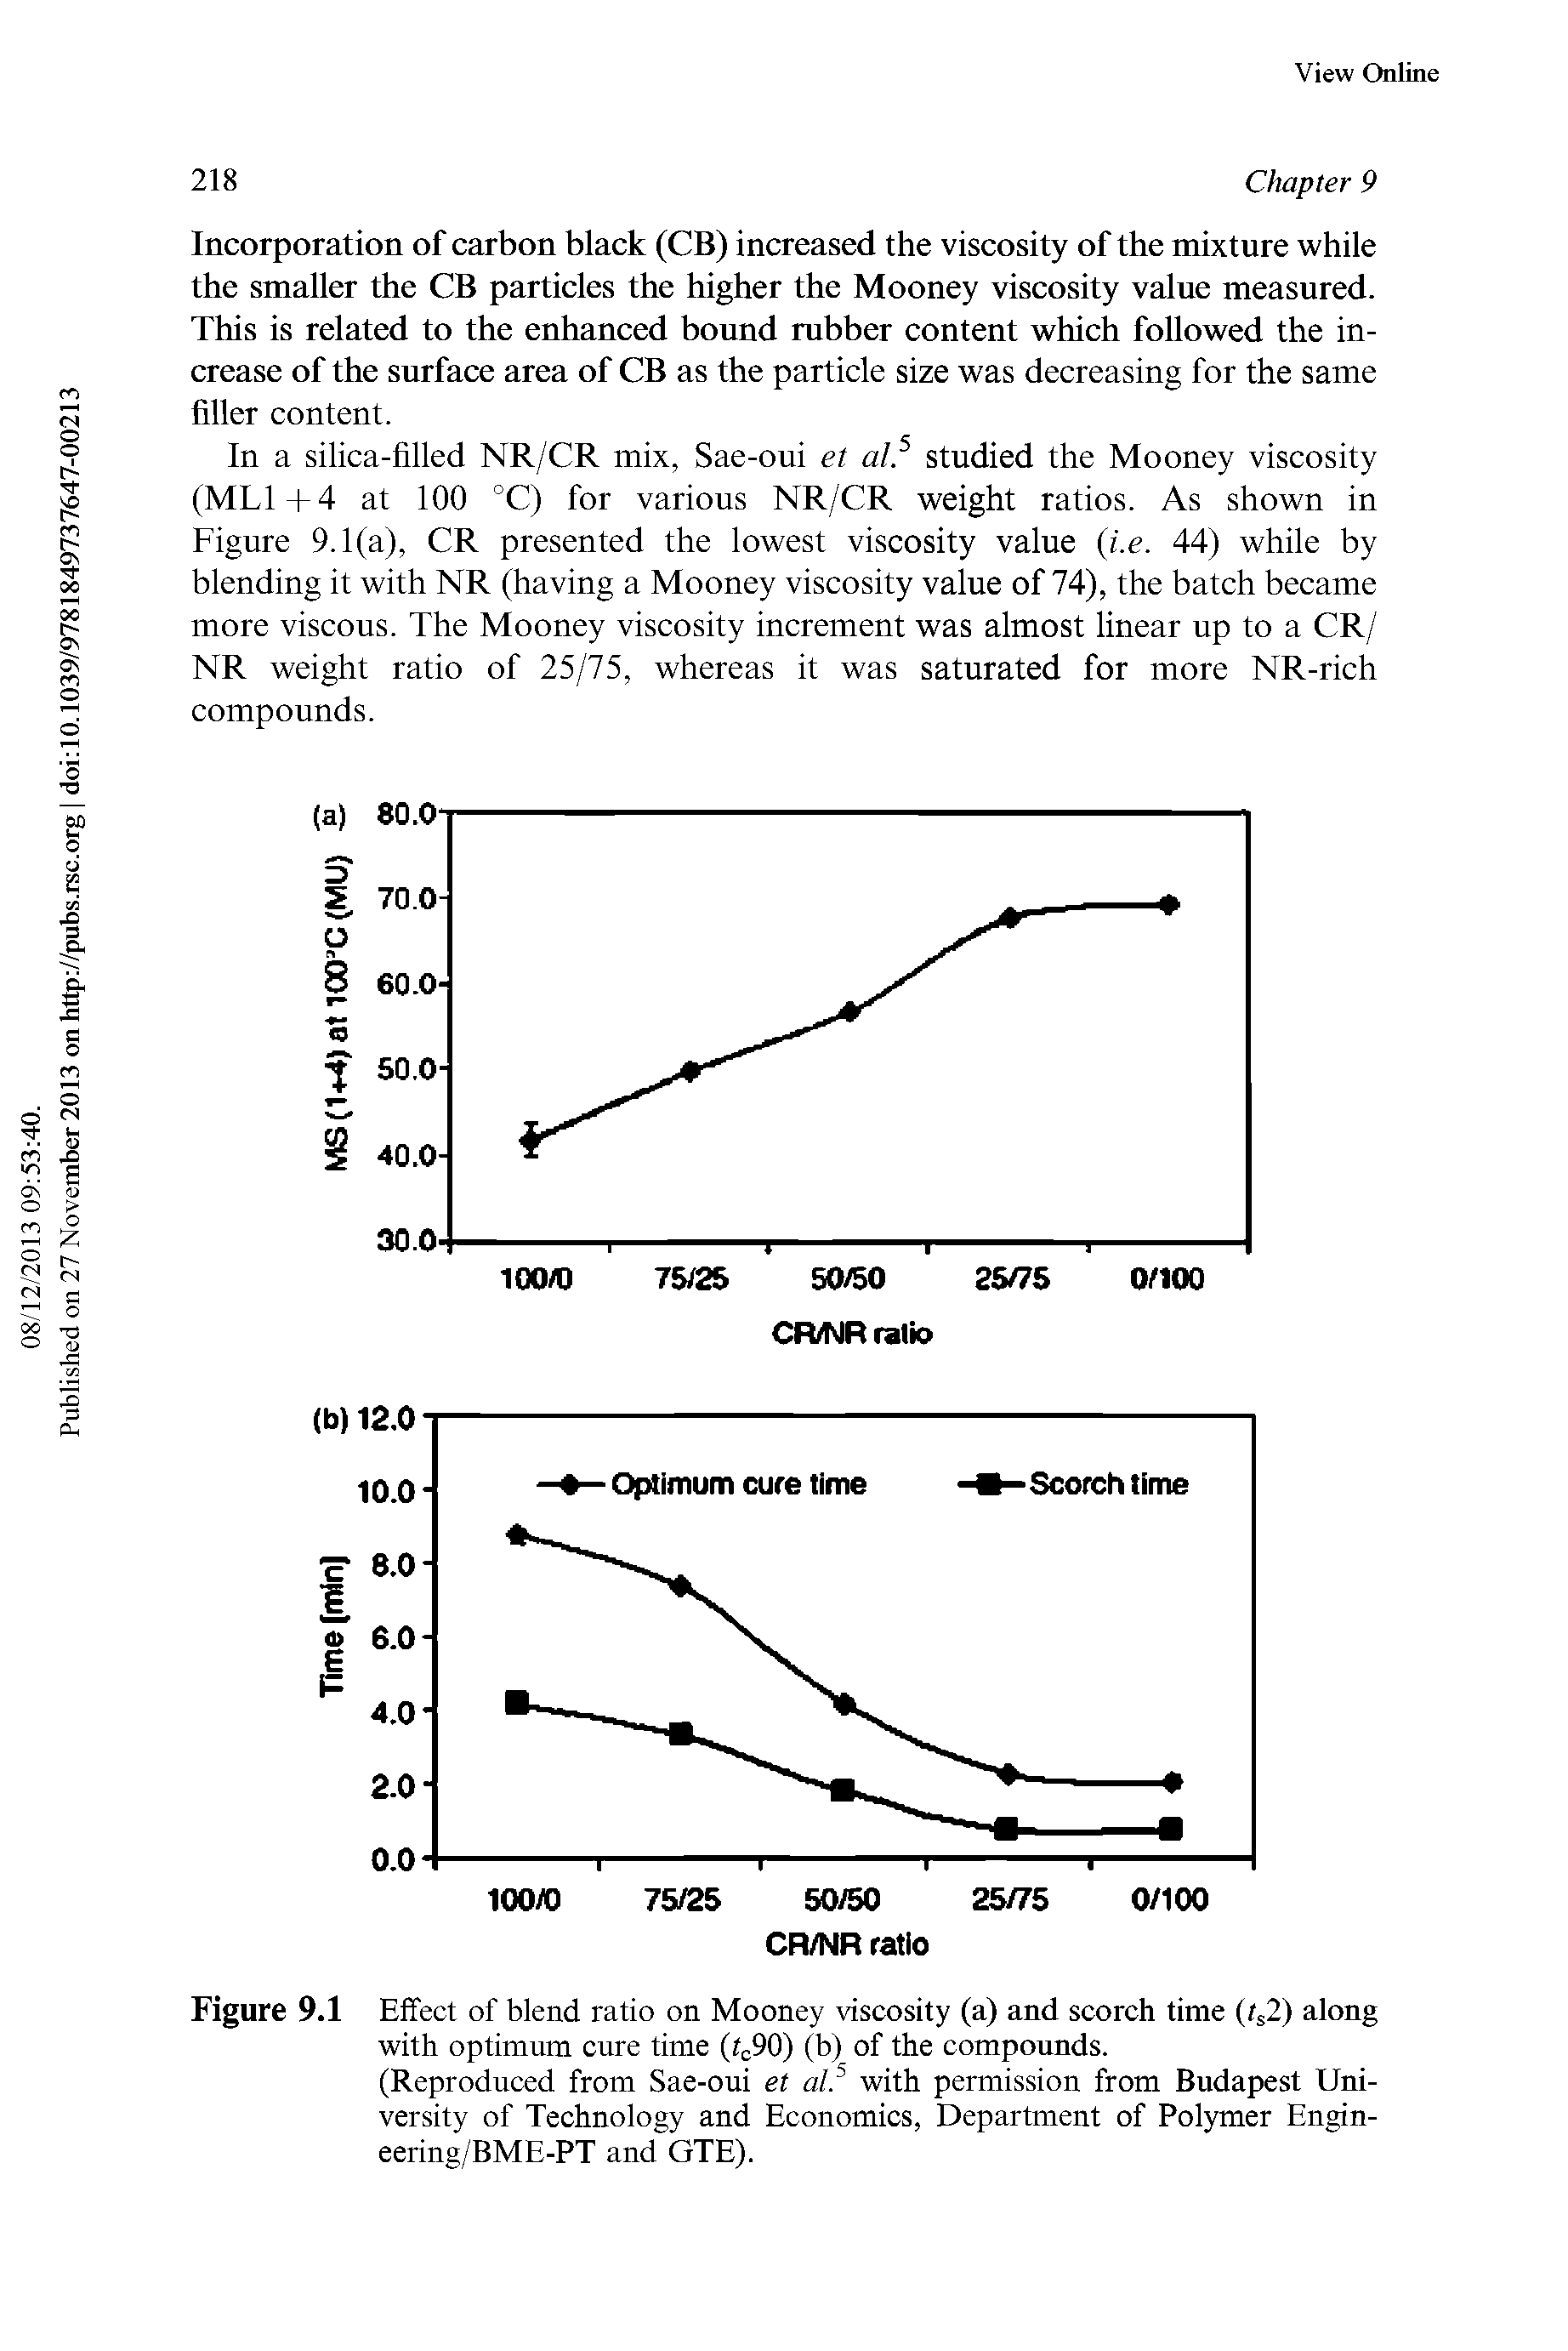 Figure 9.1 Effect of blend ratio on Mooney viscosity (a) and scorch time (is2) along with optimum cure time (tc90) (b) of the compounds.